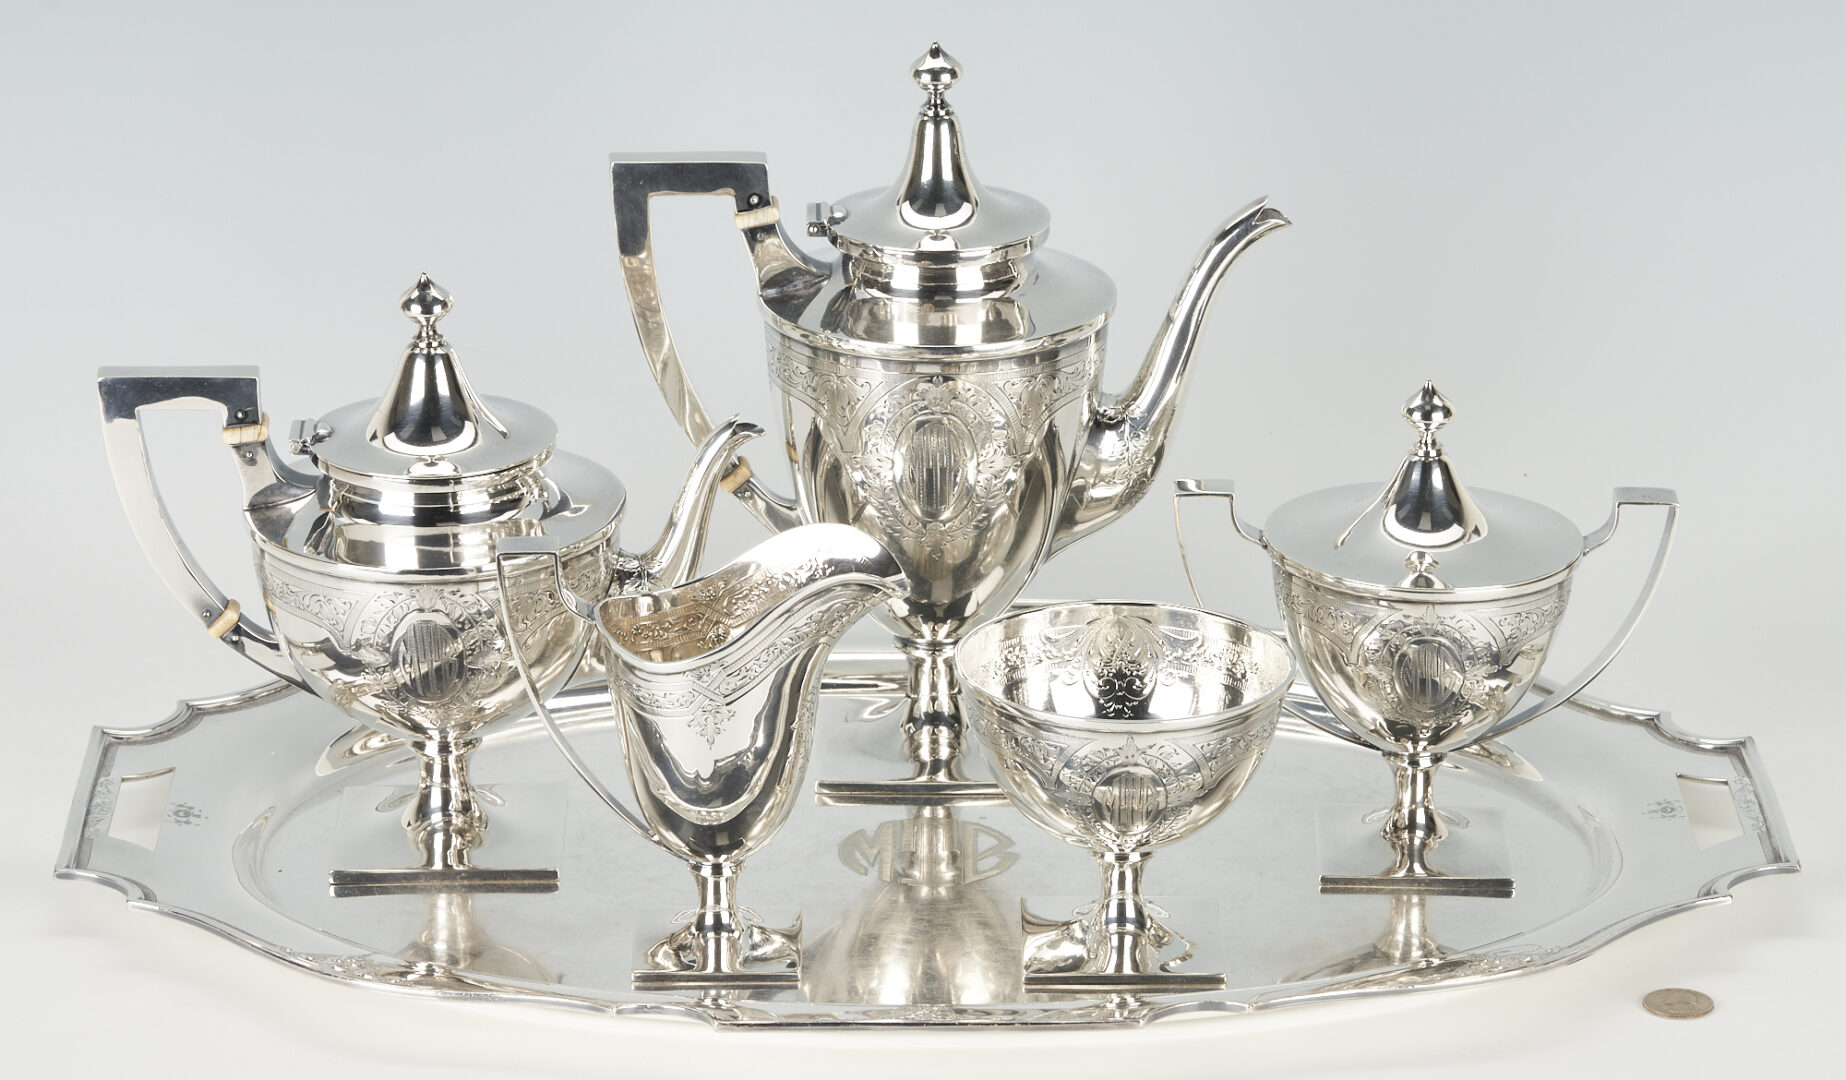 Lot 246: Schofield Sterling Silver Tea Set w/ Silverplated Tray, 6 pcs total